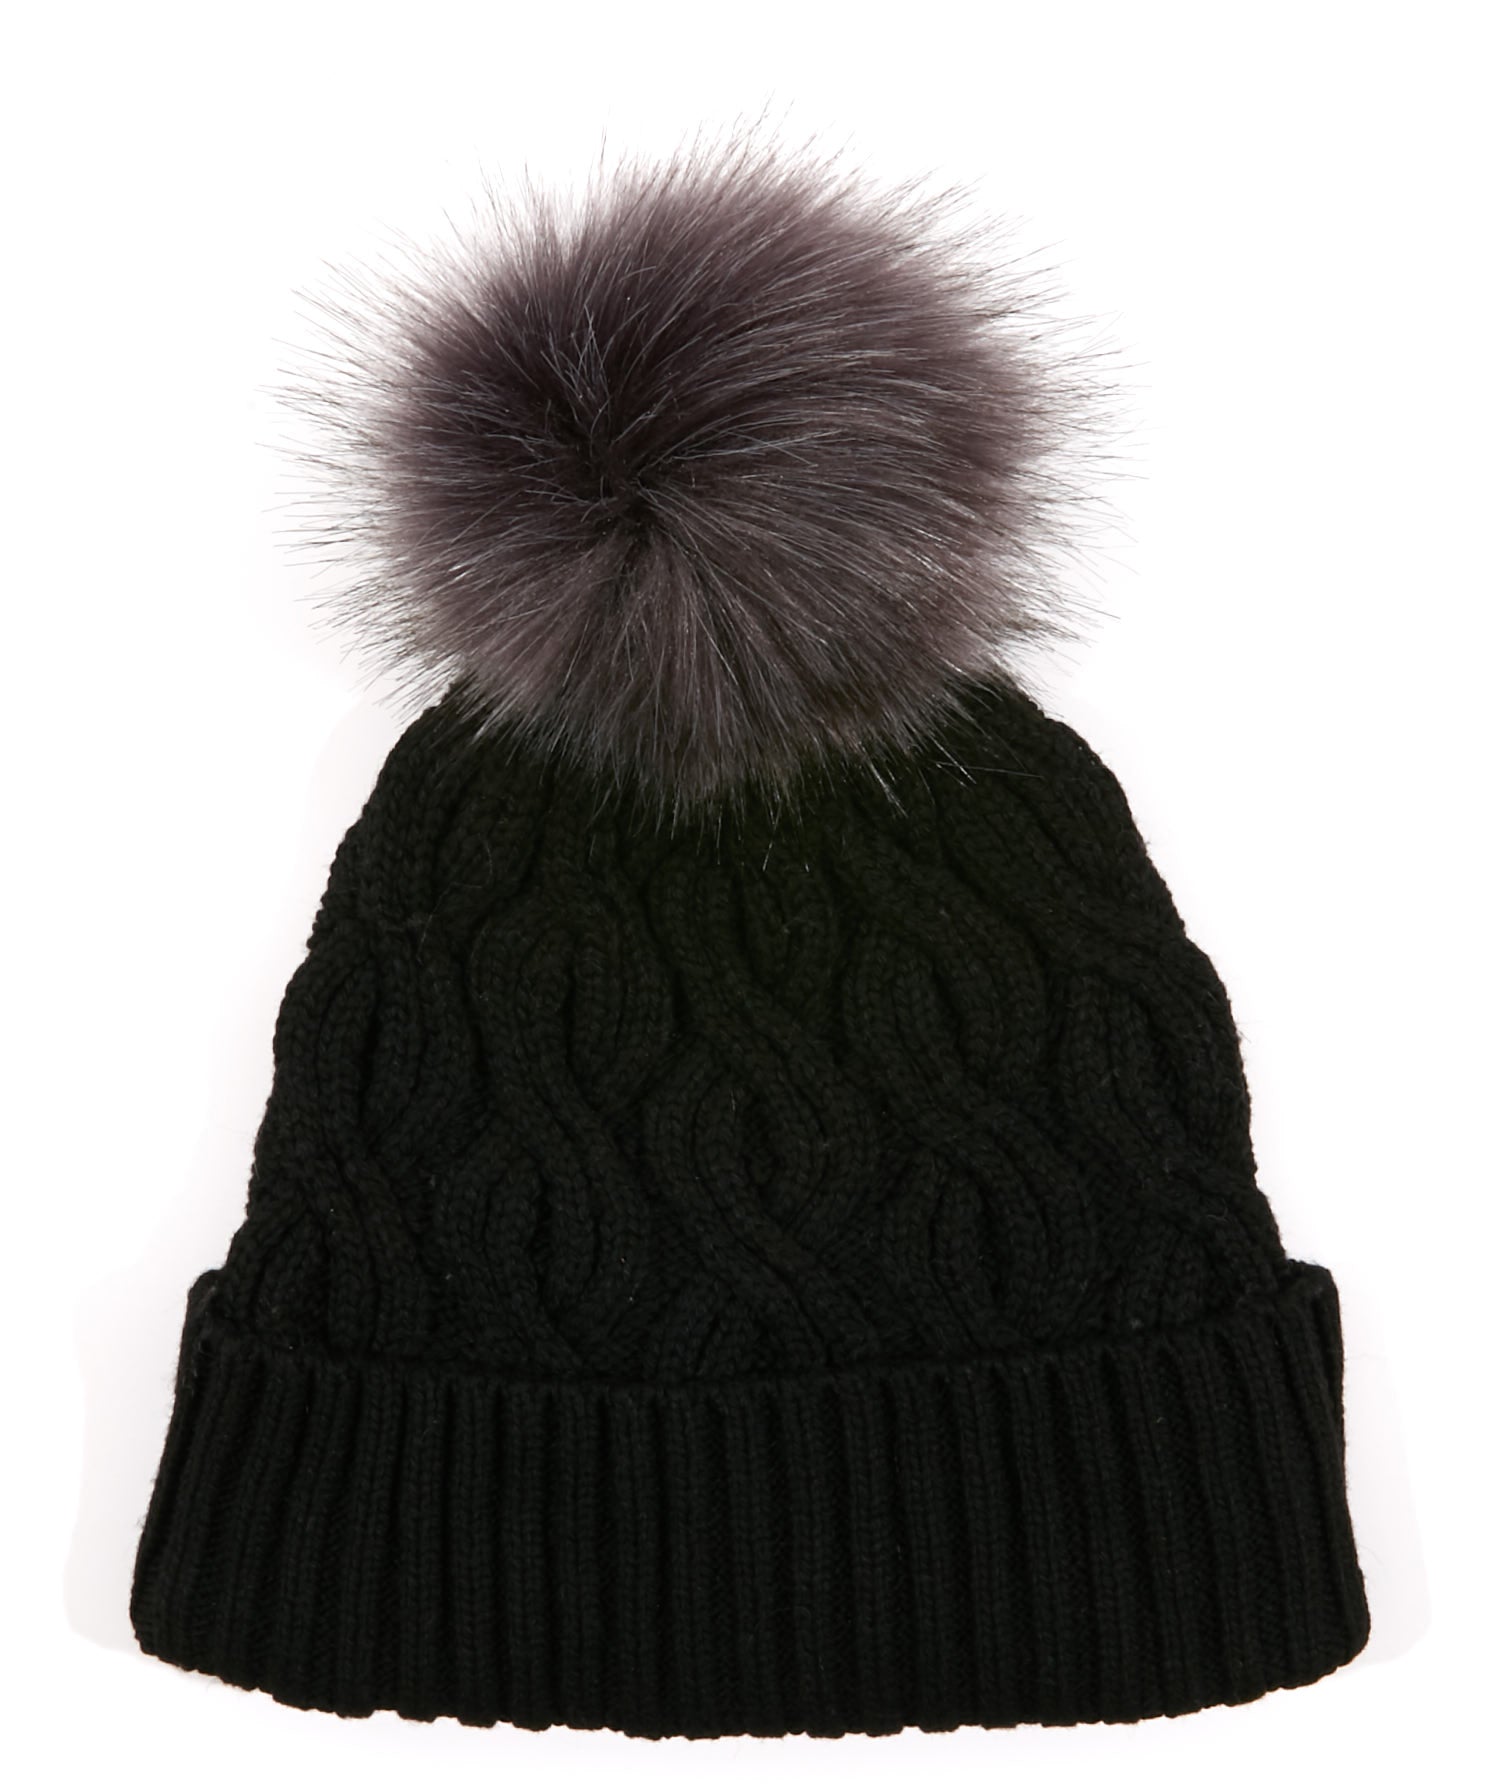 Recycled Pom Hat in color Black